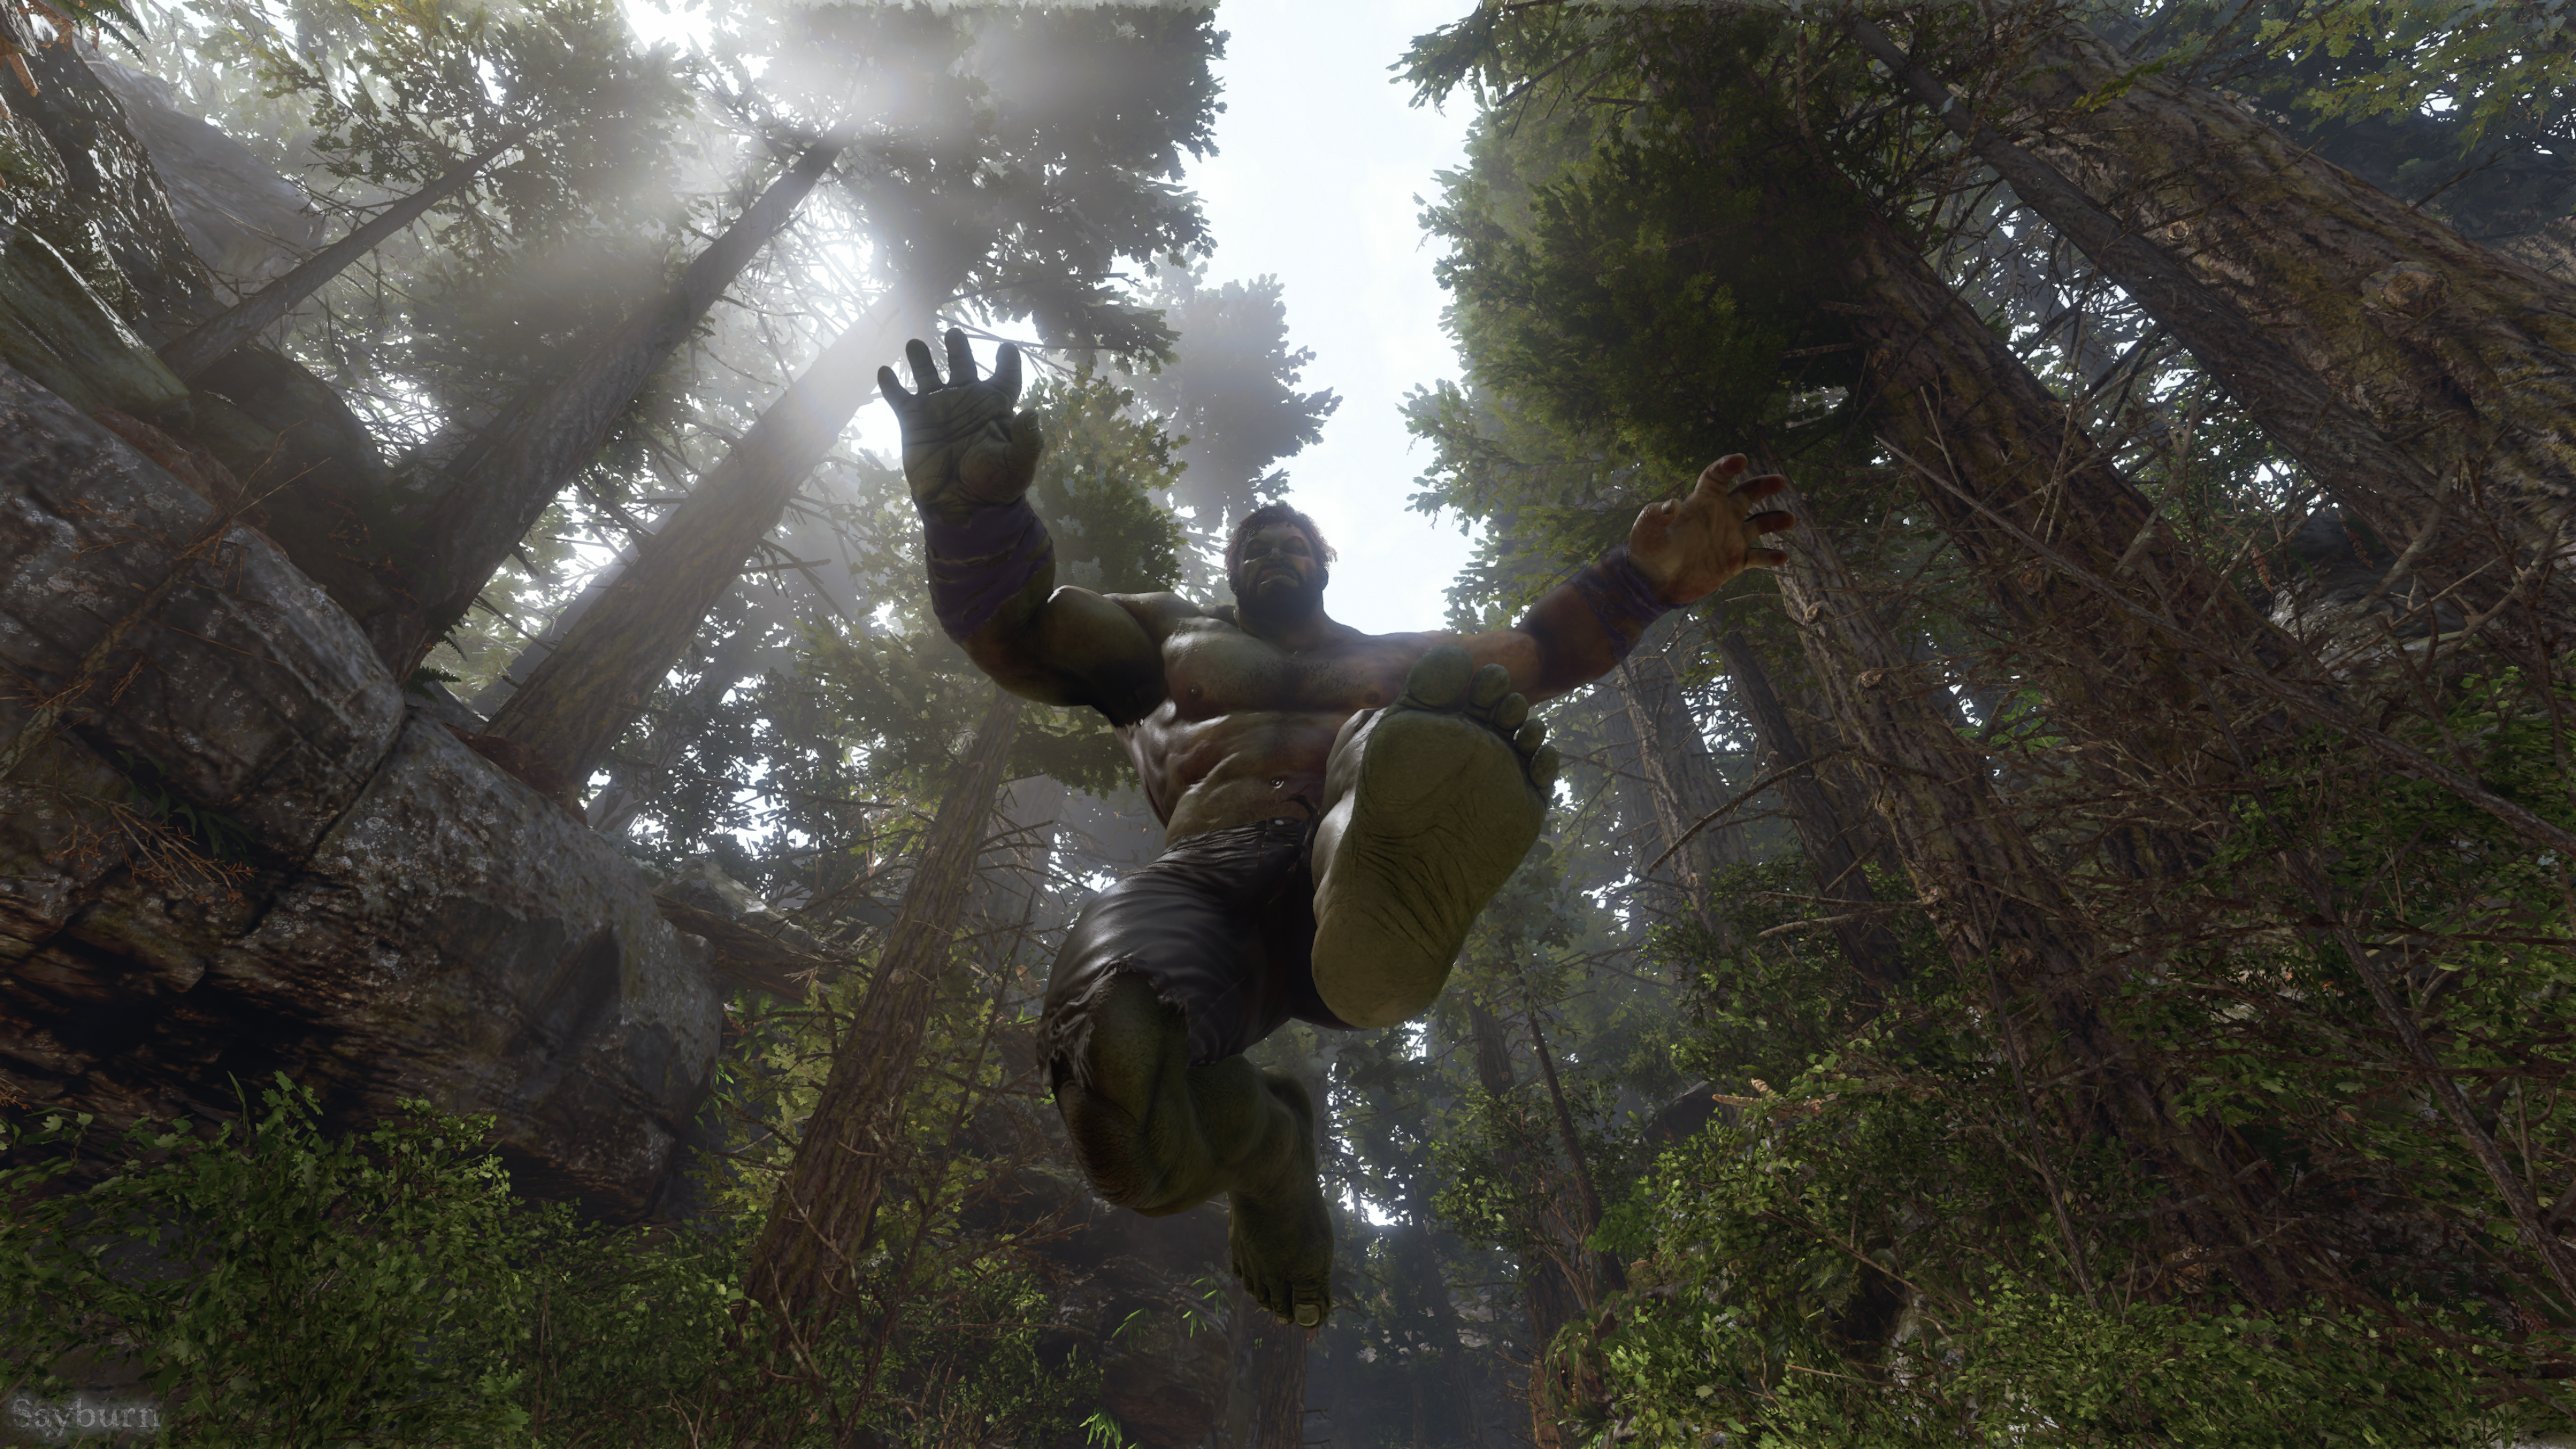 superhero, jumping, worm's eye view, forest, leaves, screen shot